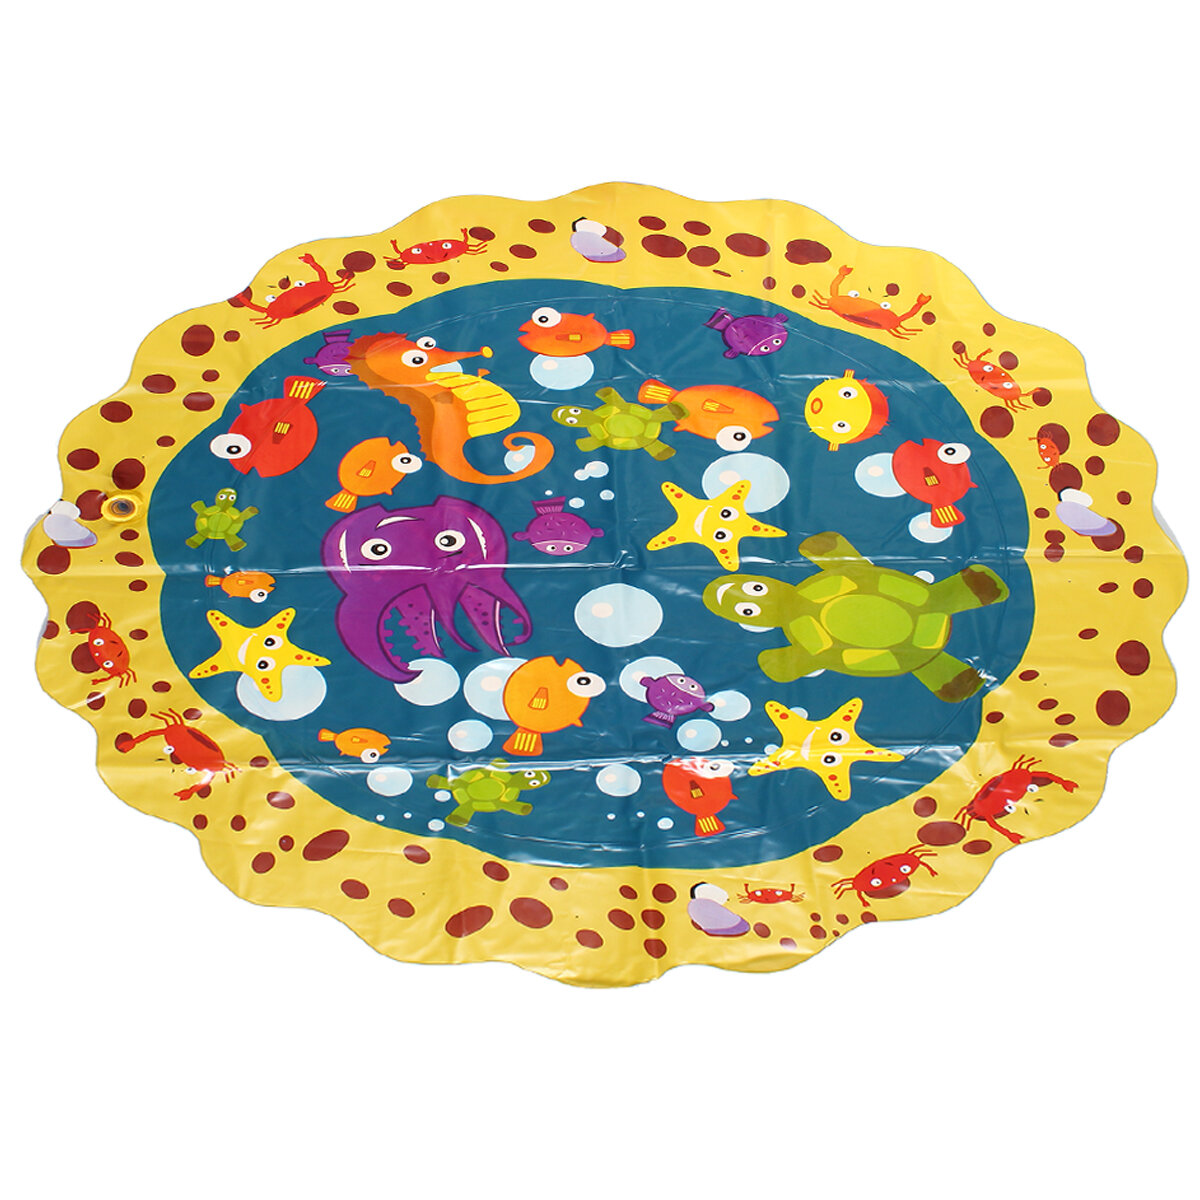 1M Girls Boys Inflatable Cushion Play Water Toy Mat Children Outdoor Games Sprinkler Pad Baby Kids P